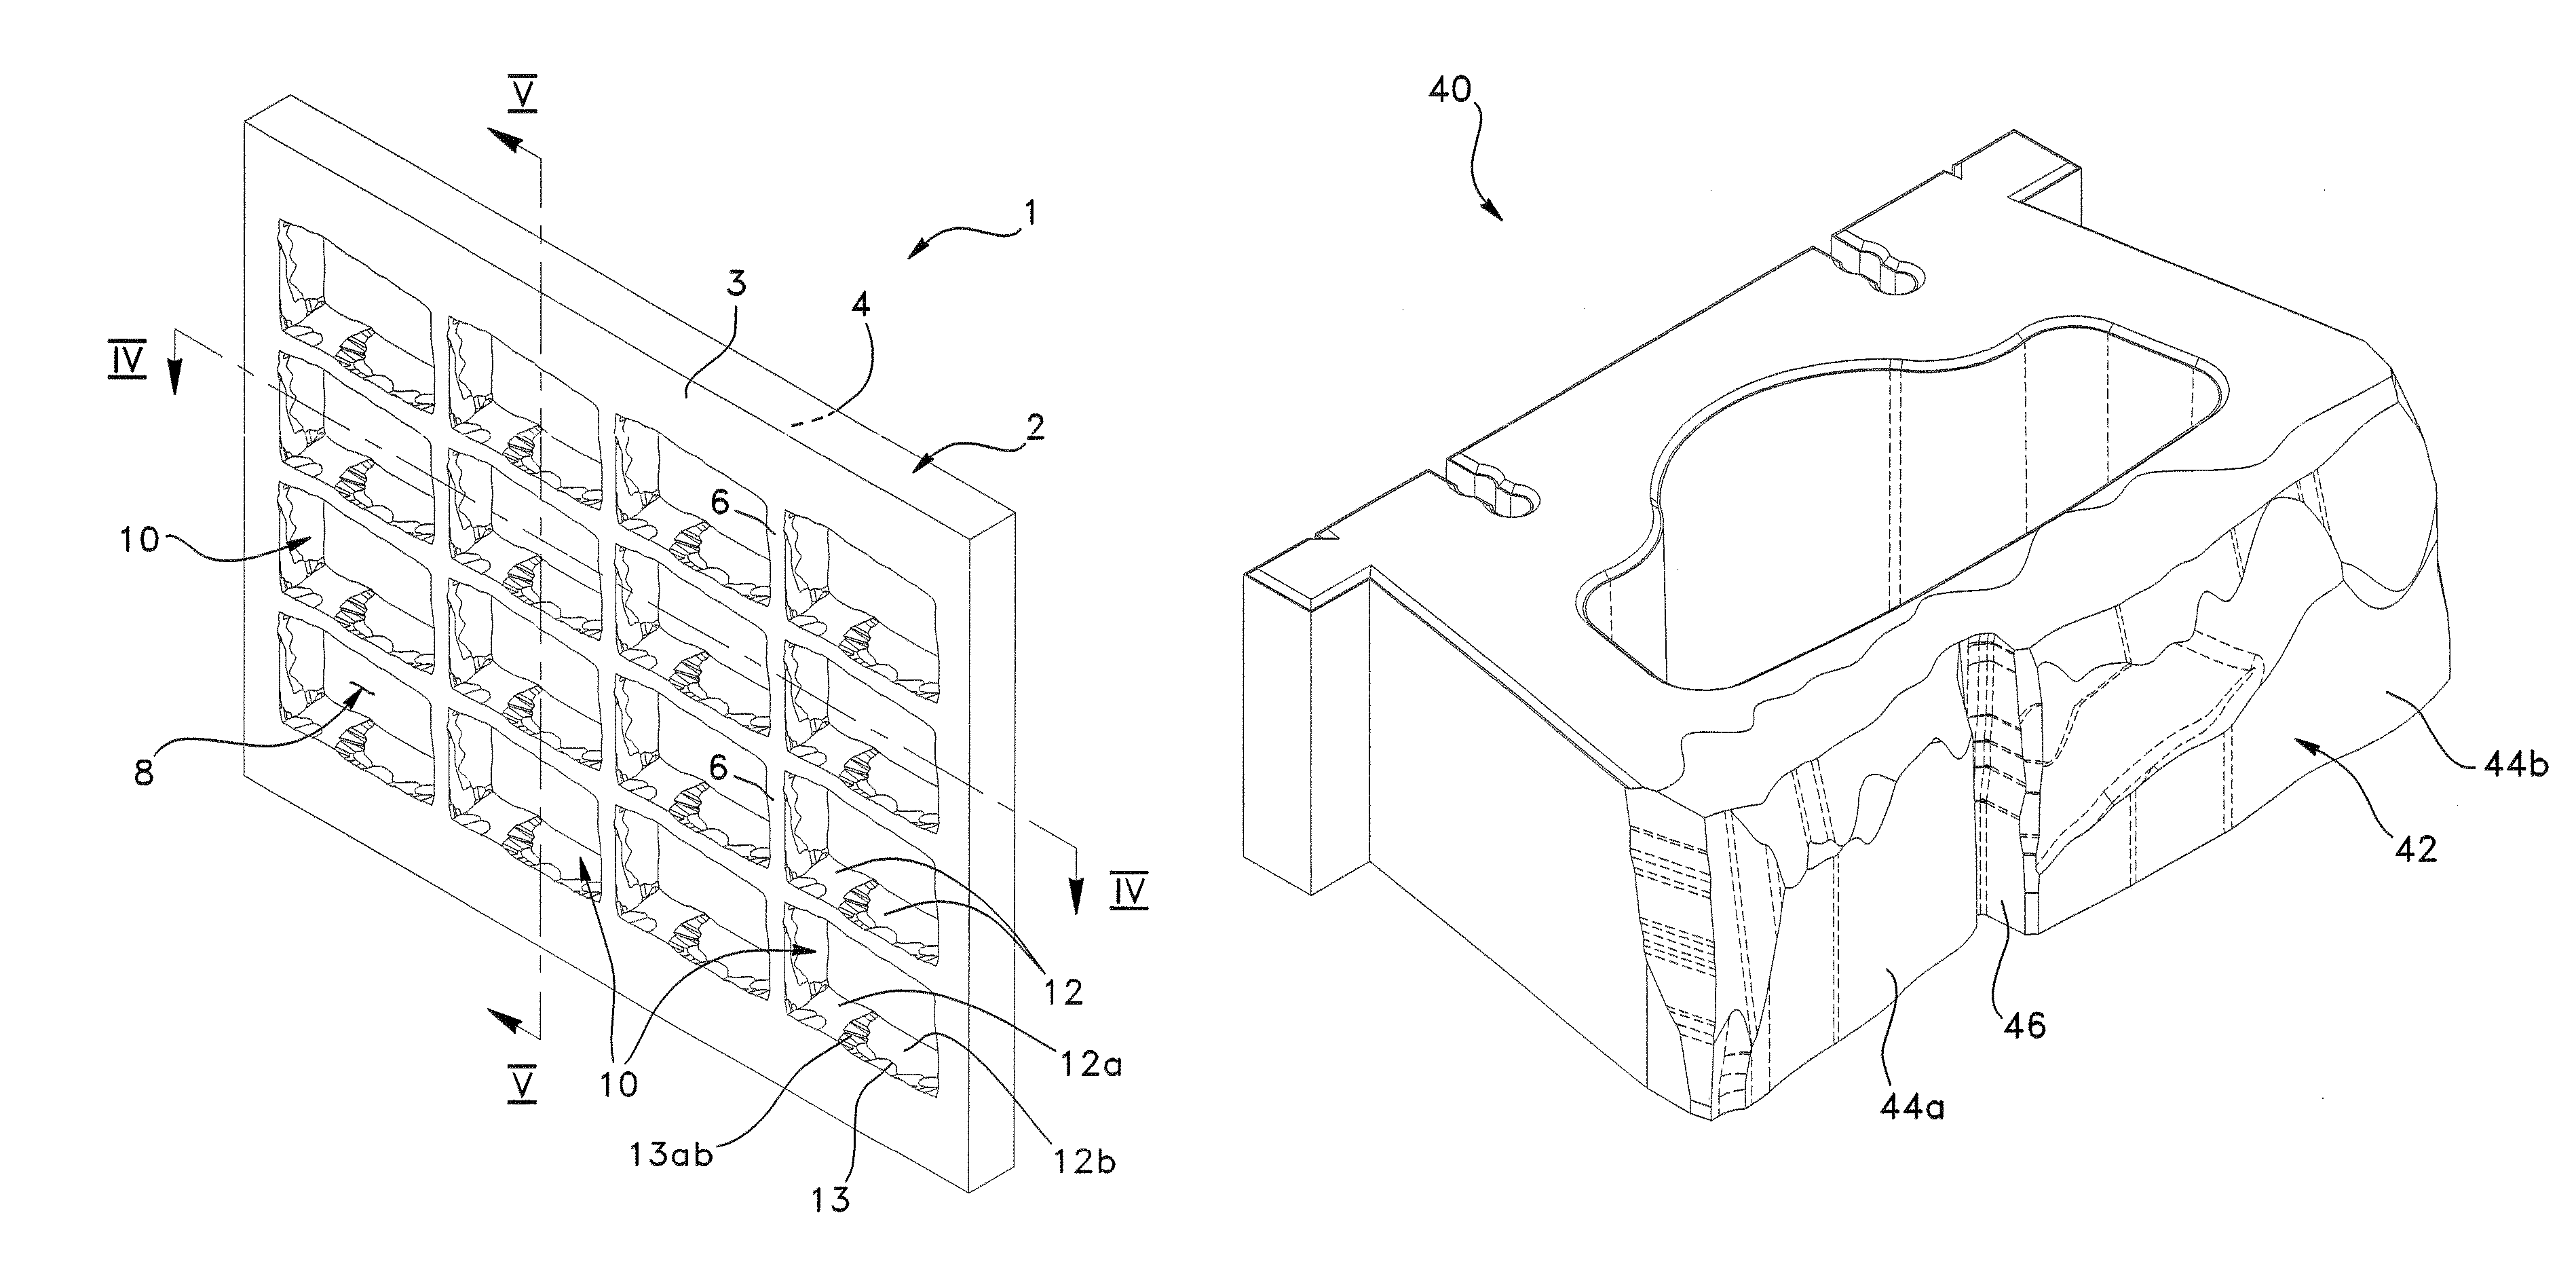 Molding apparatus for producing dry cast products having textured side surfaces